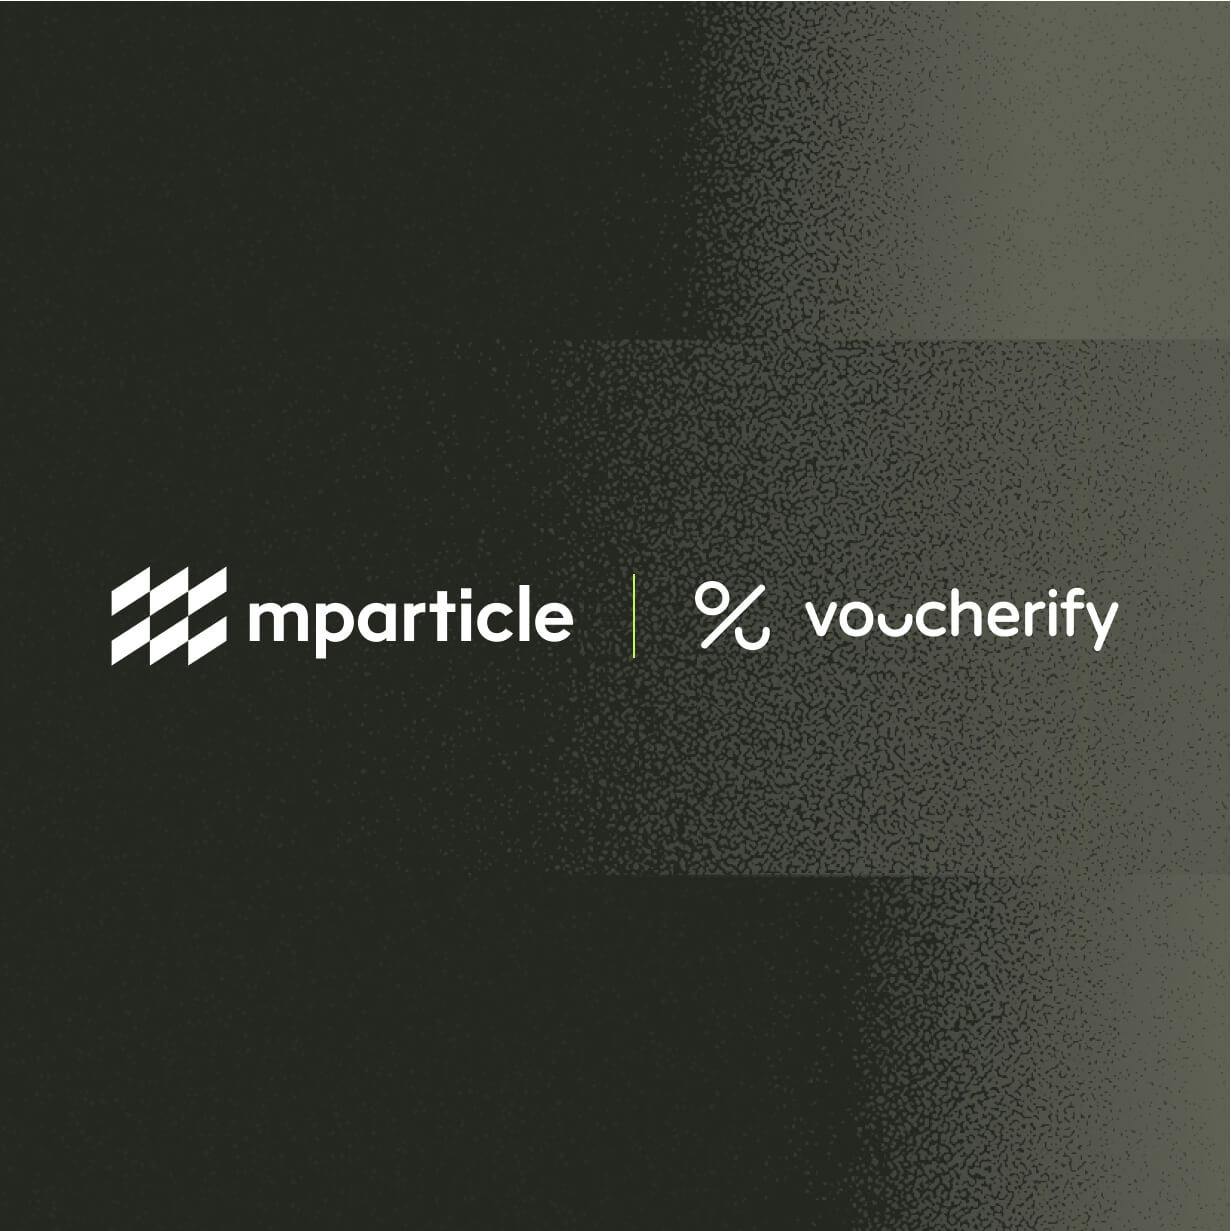 Power personalized omni-channel promotions in Voucherify with customer insights in mParticle